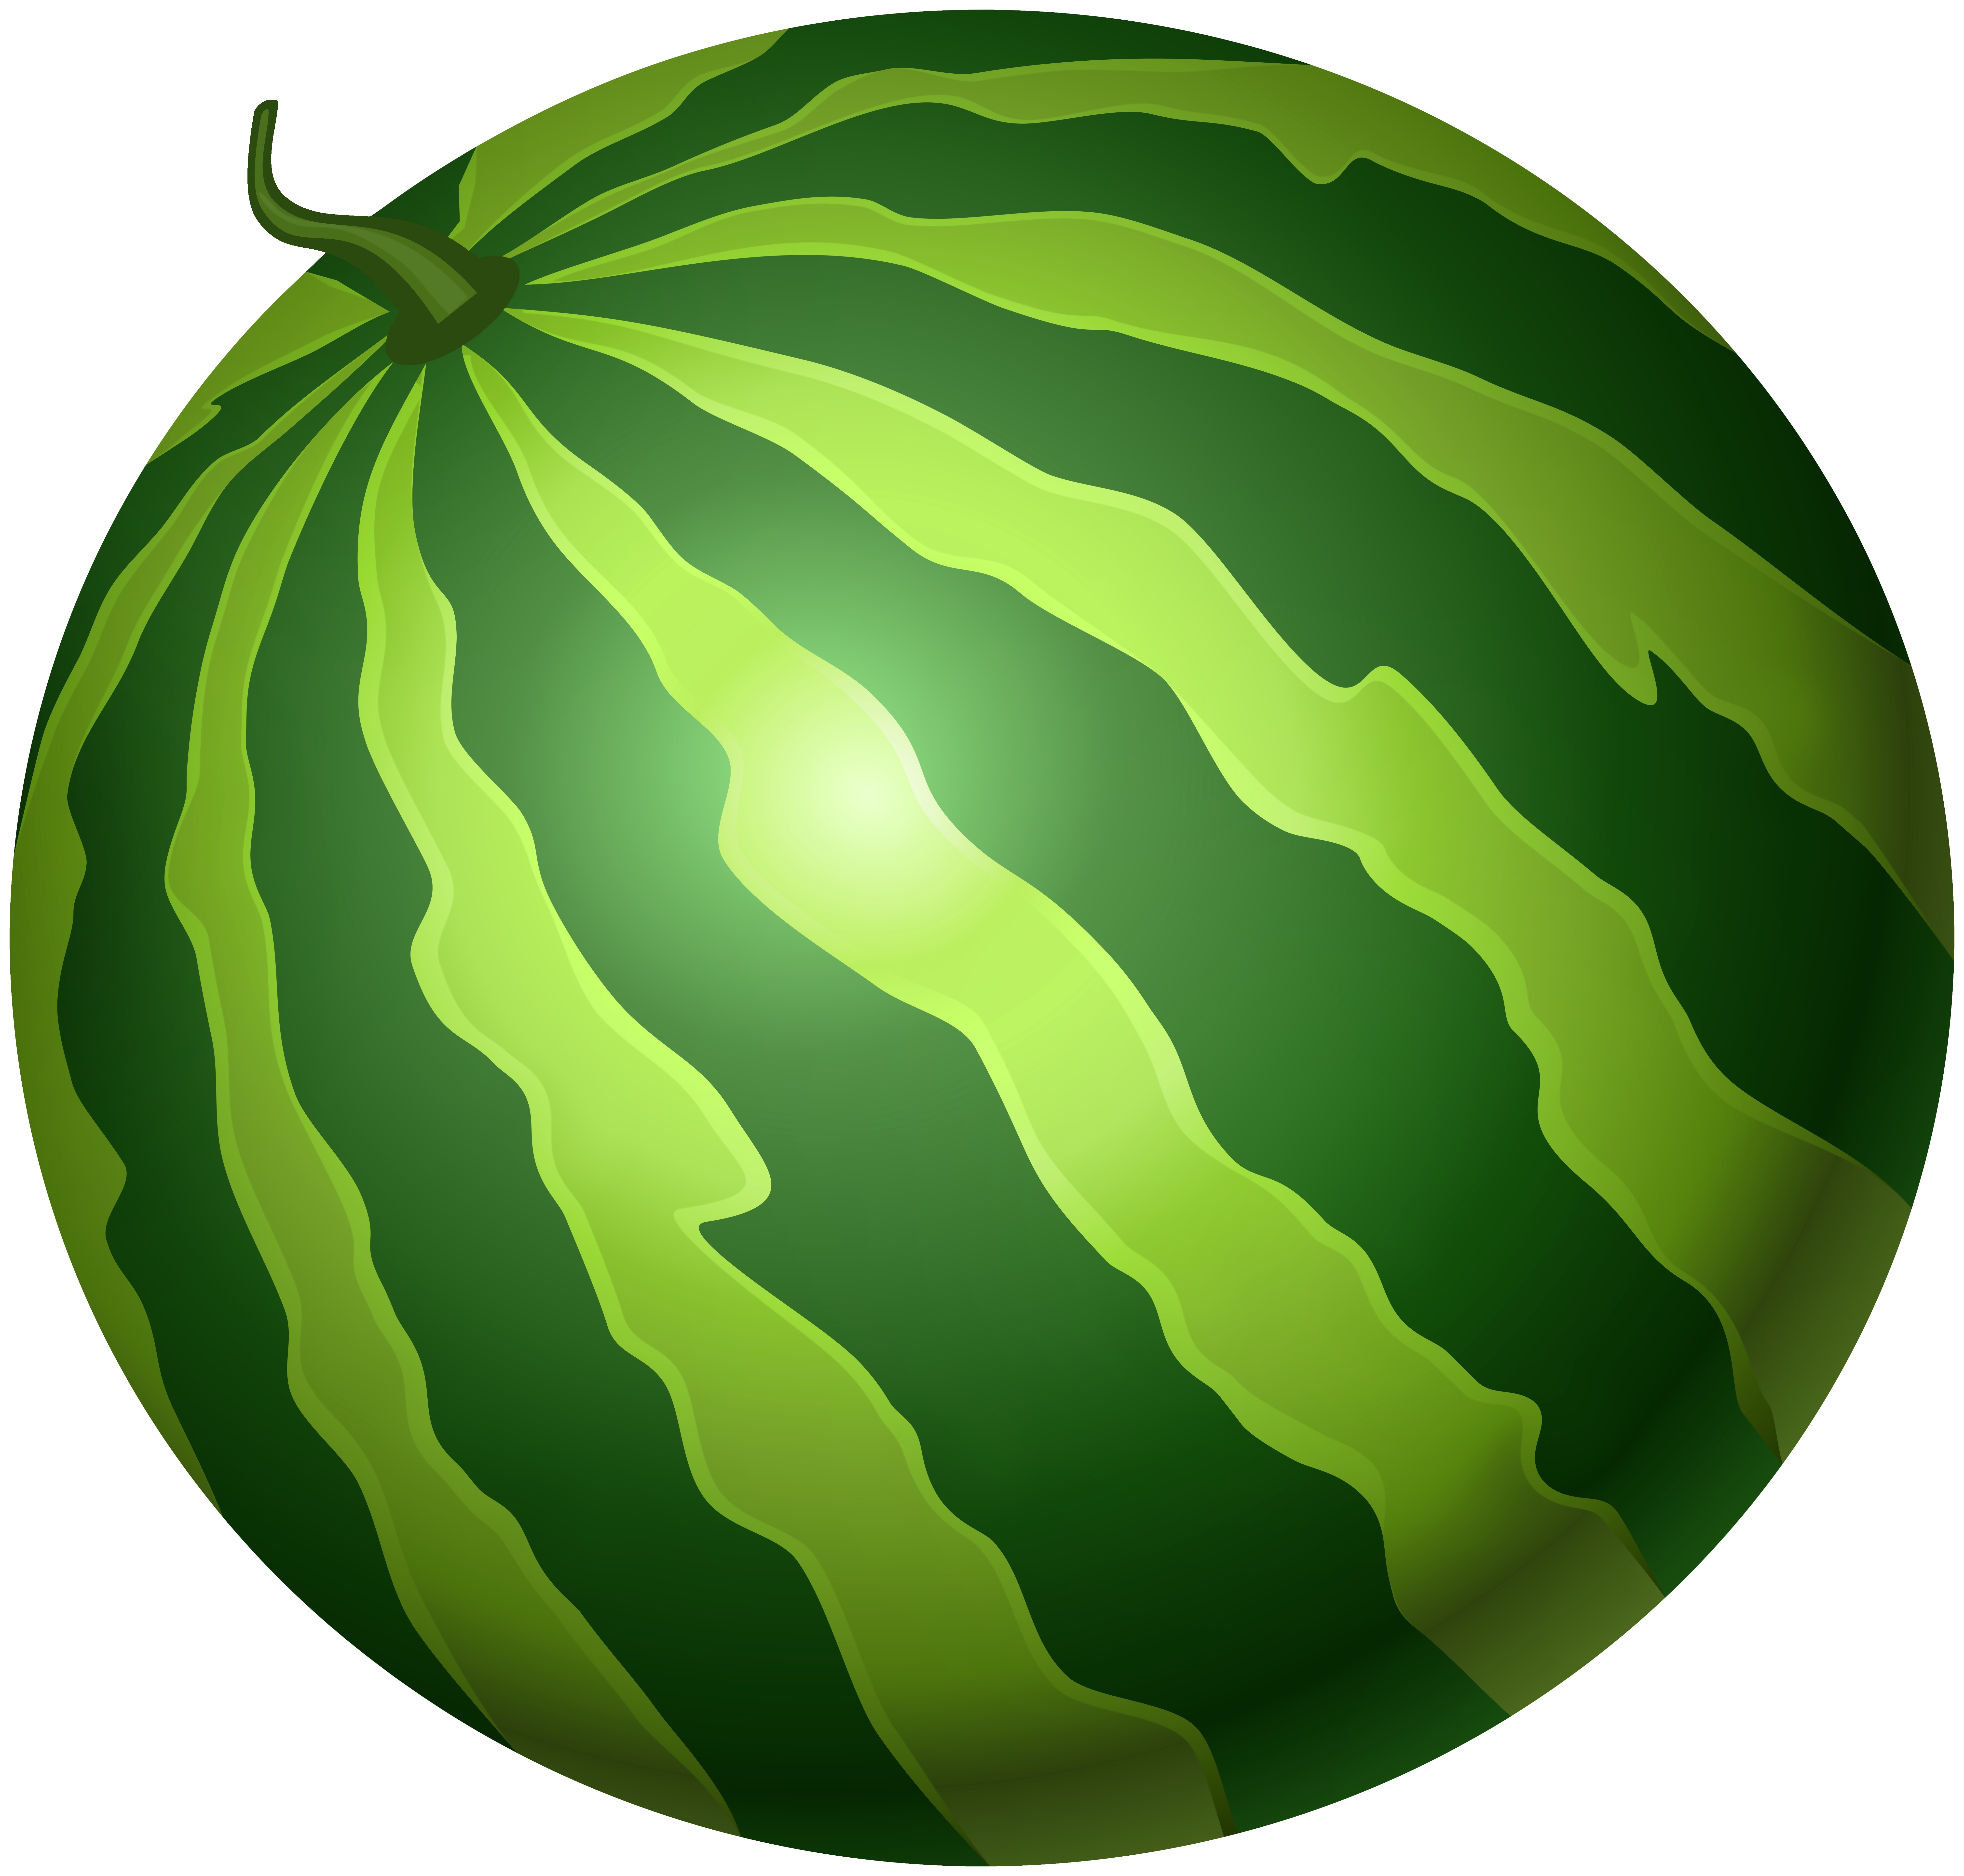 watermelon png